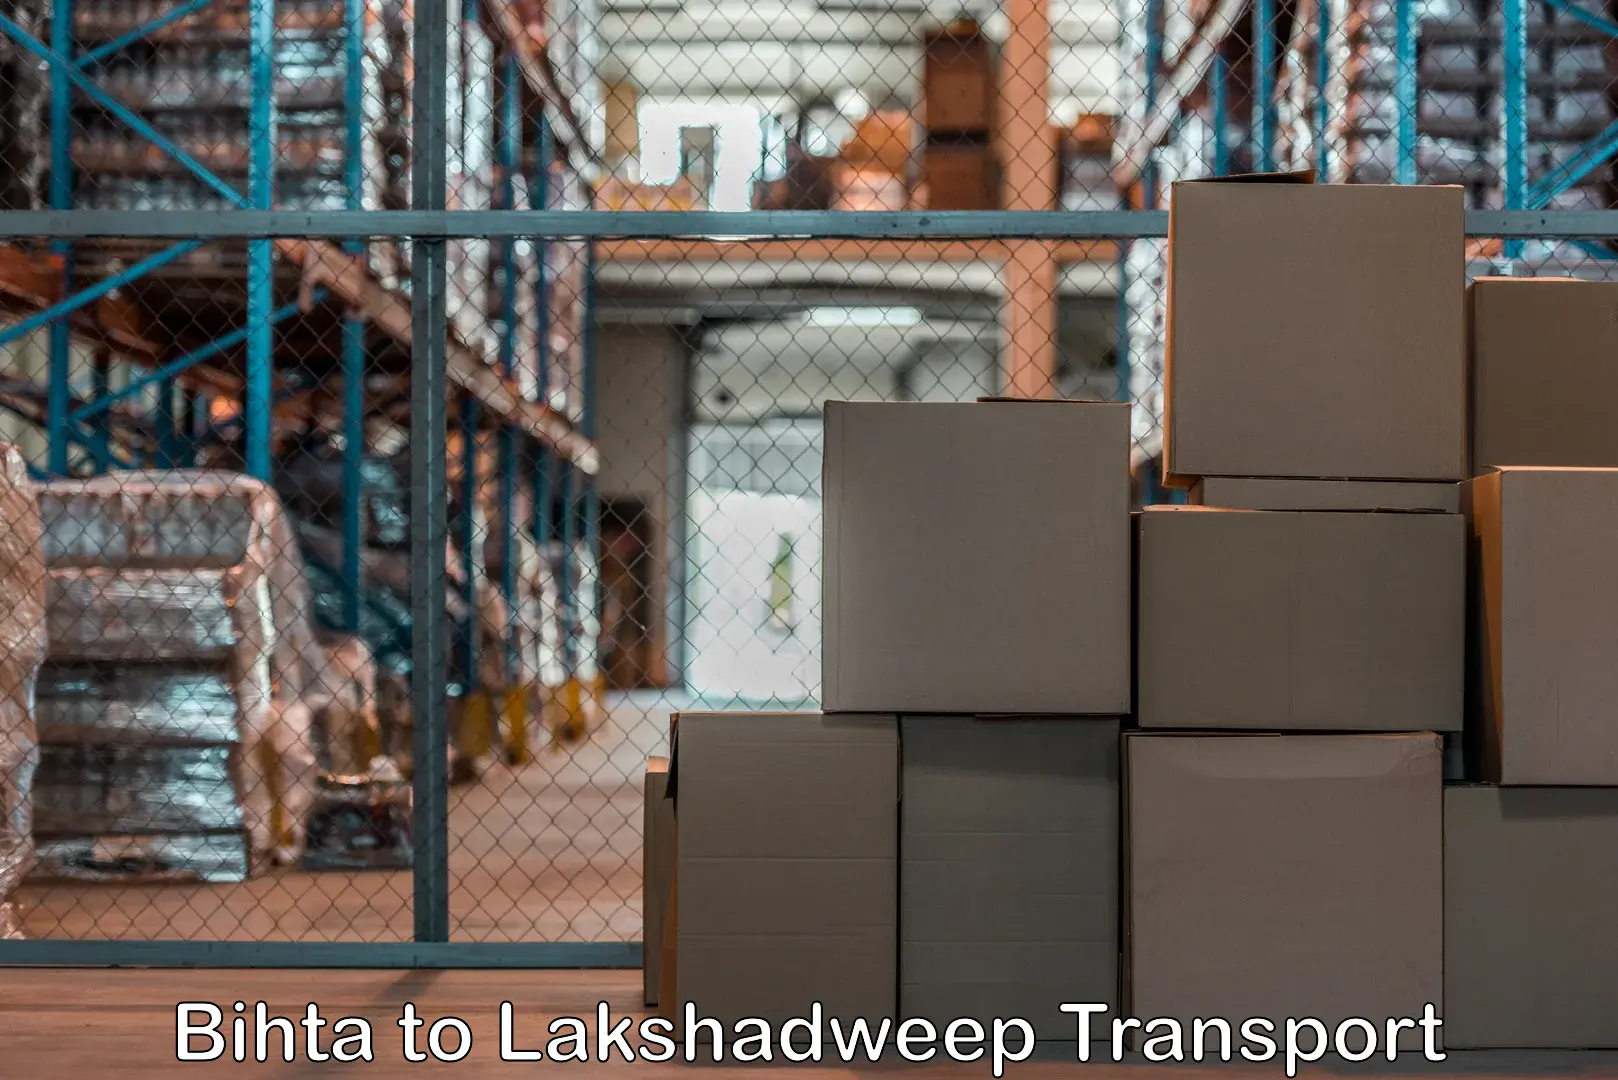 Goods delivery service Bihta to Lakshadweep